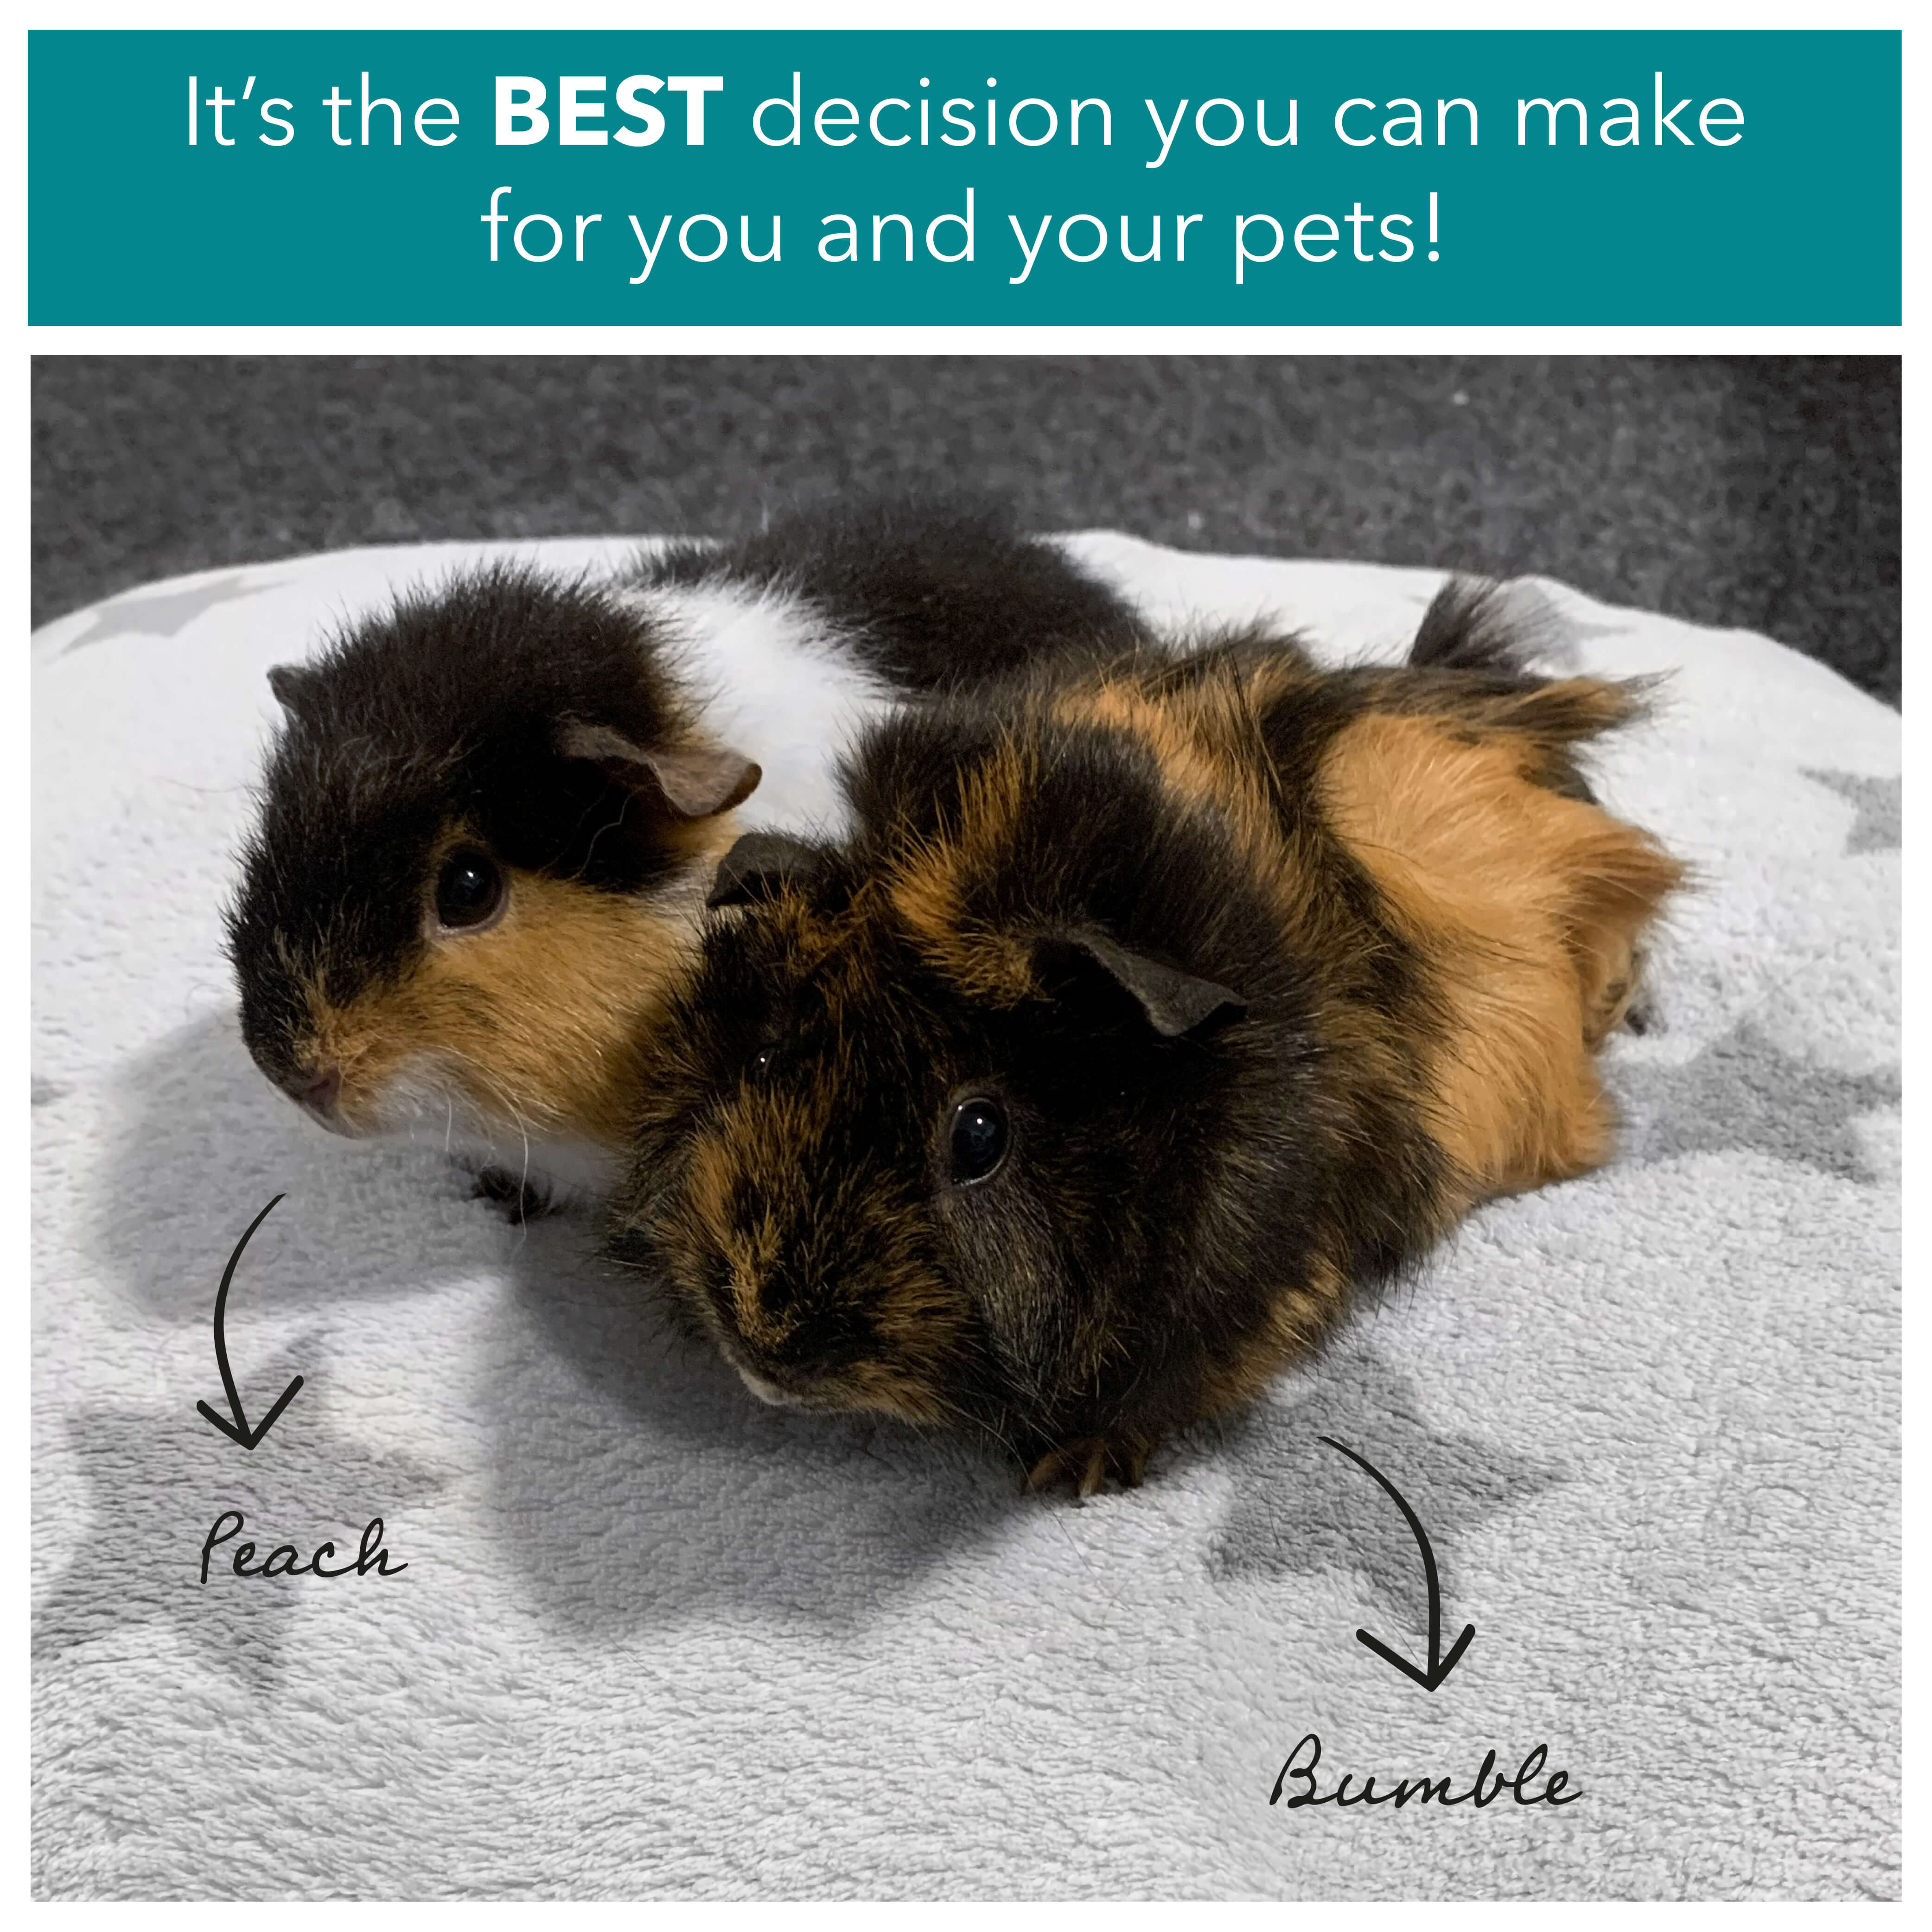 It's the best decision you can make for you and your pets